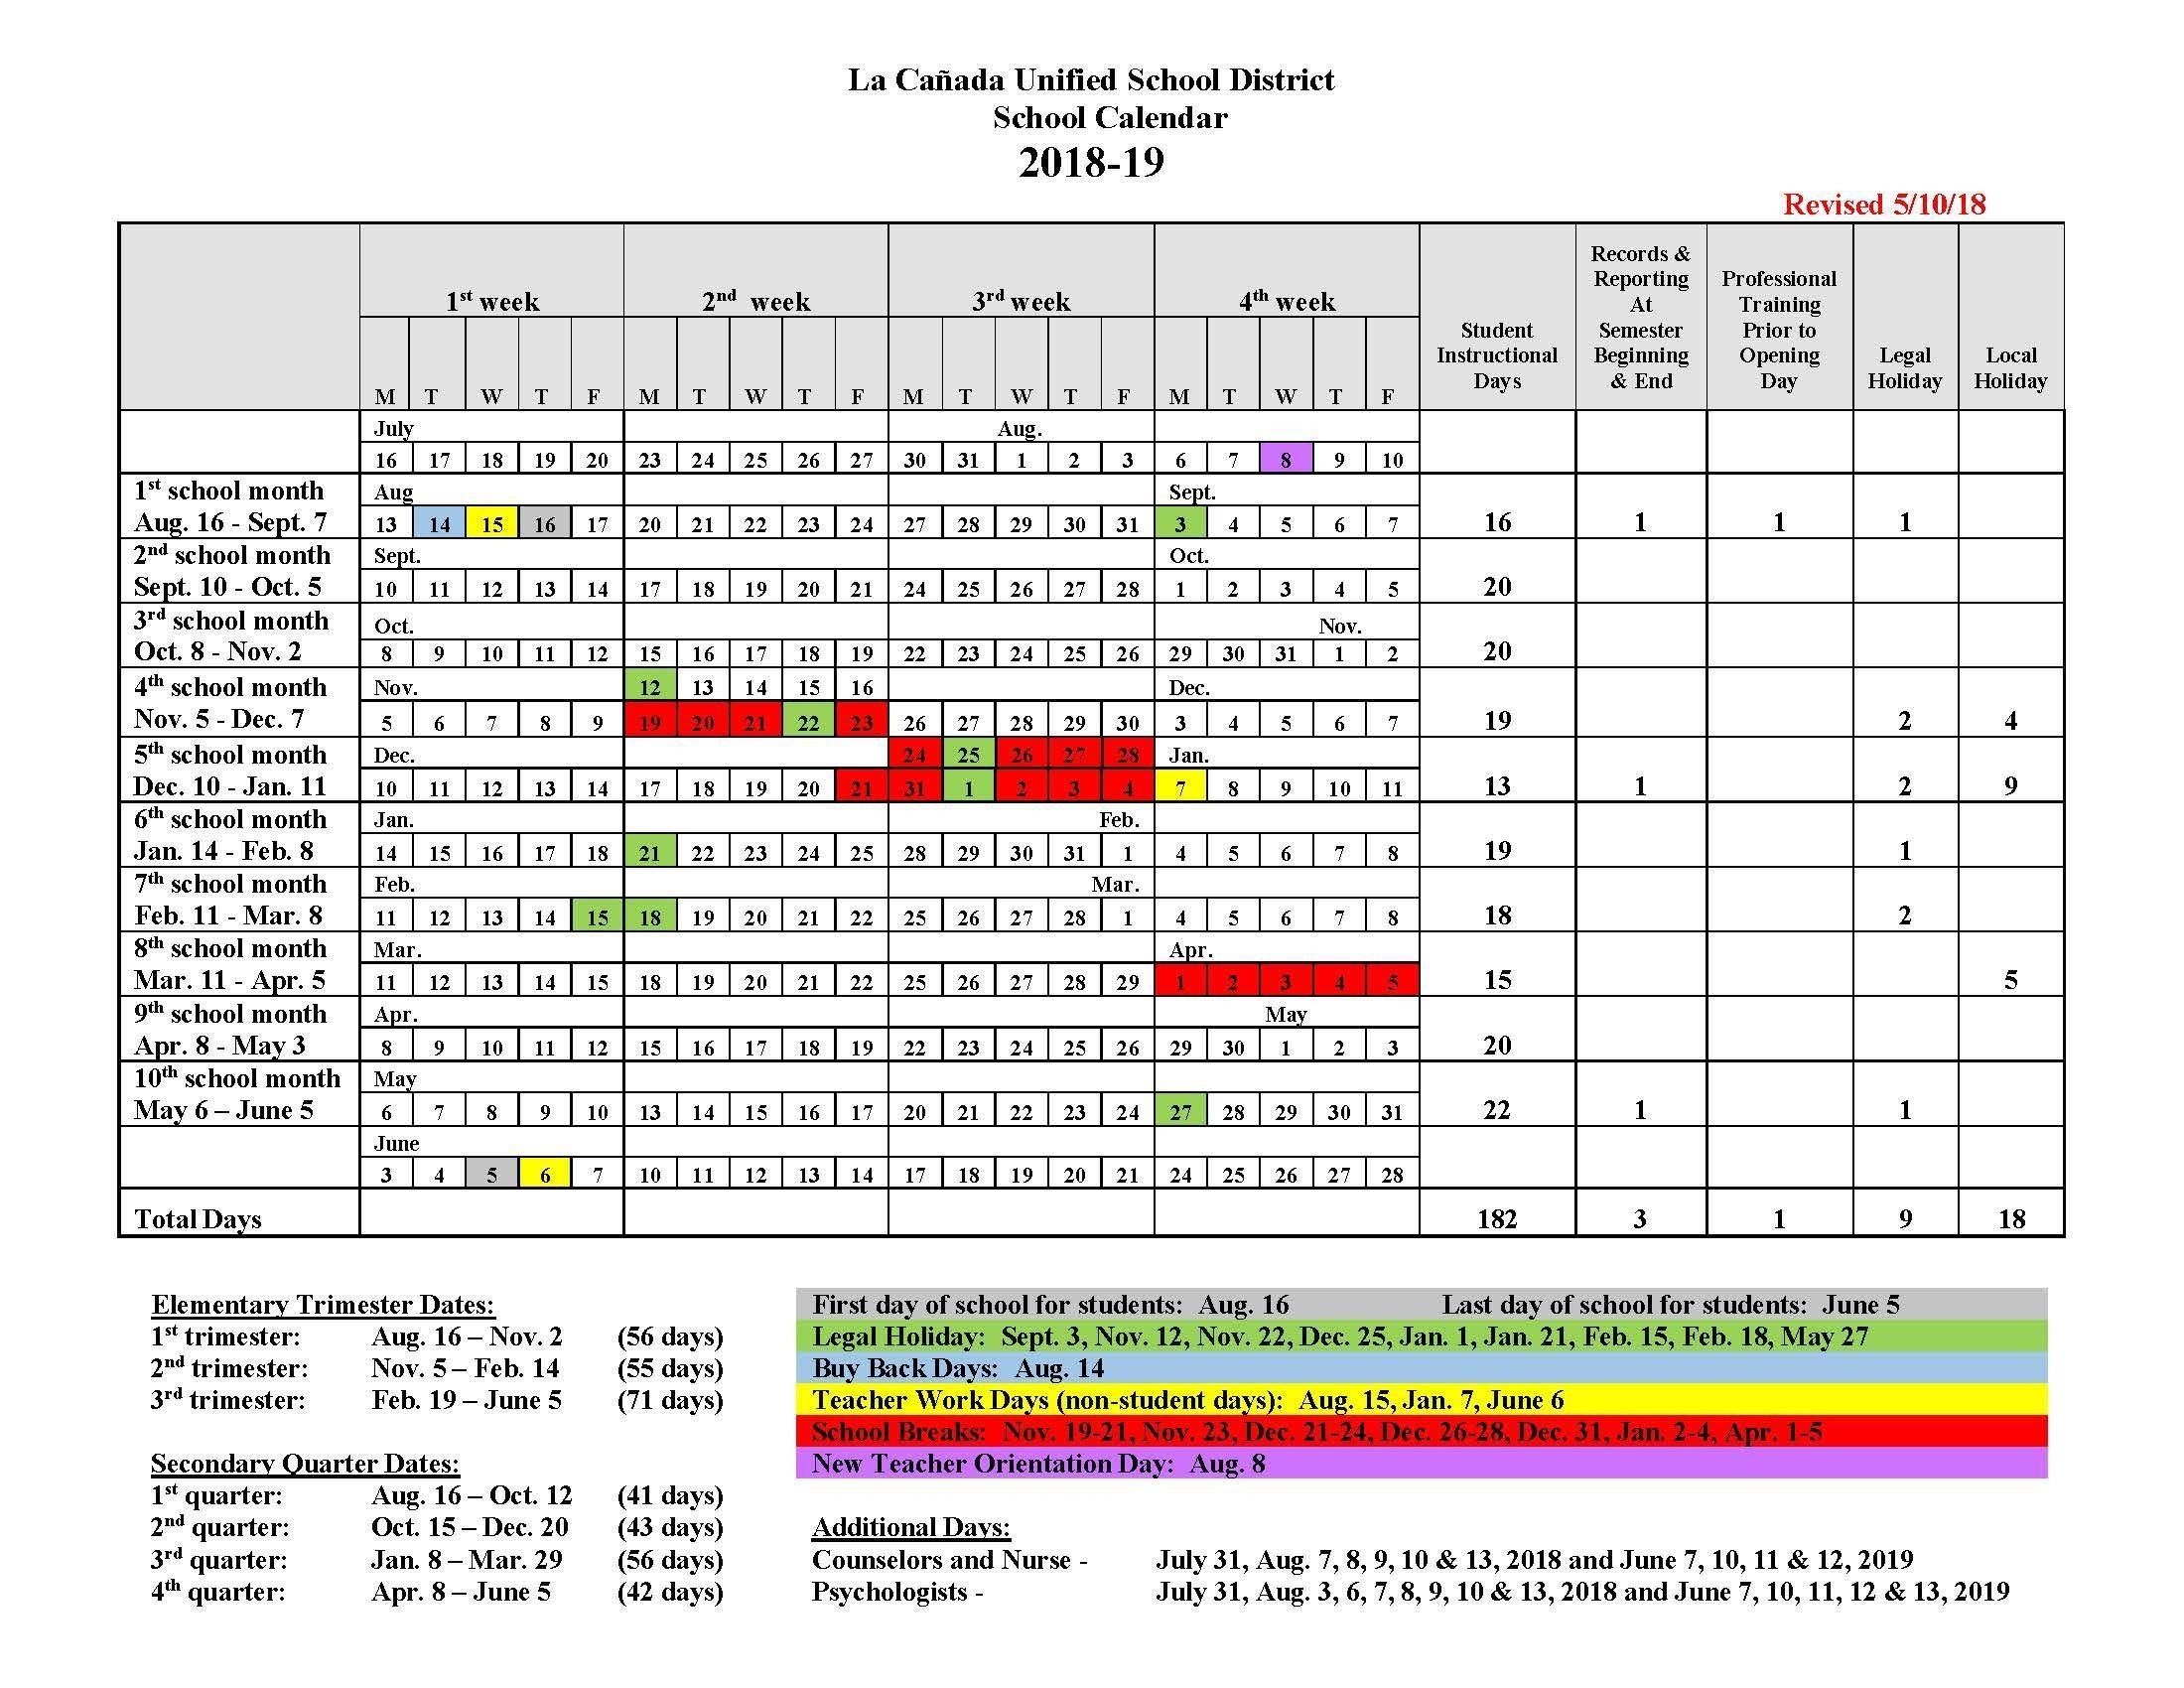 Instructional Days Calendars – Yearly Calendars – La Cañada Unified with What Day Is It Calendar